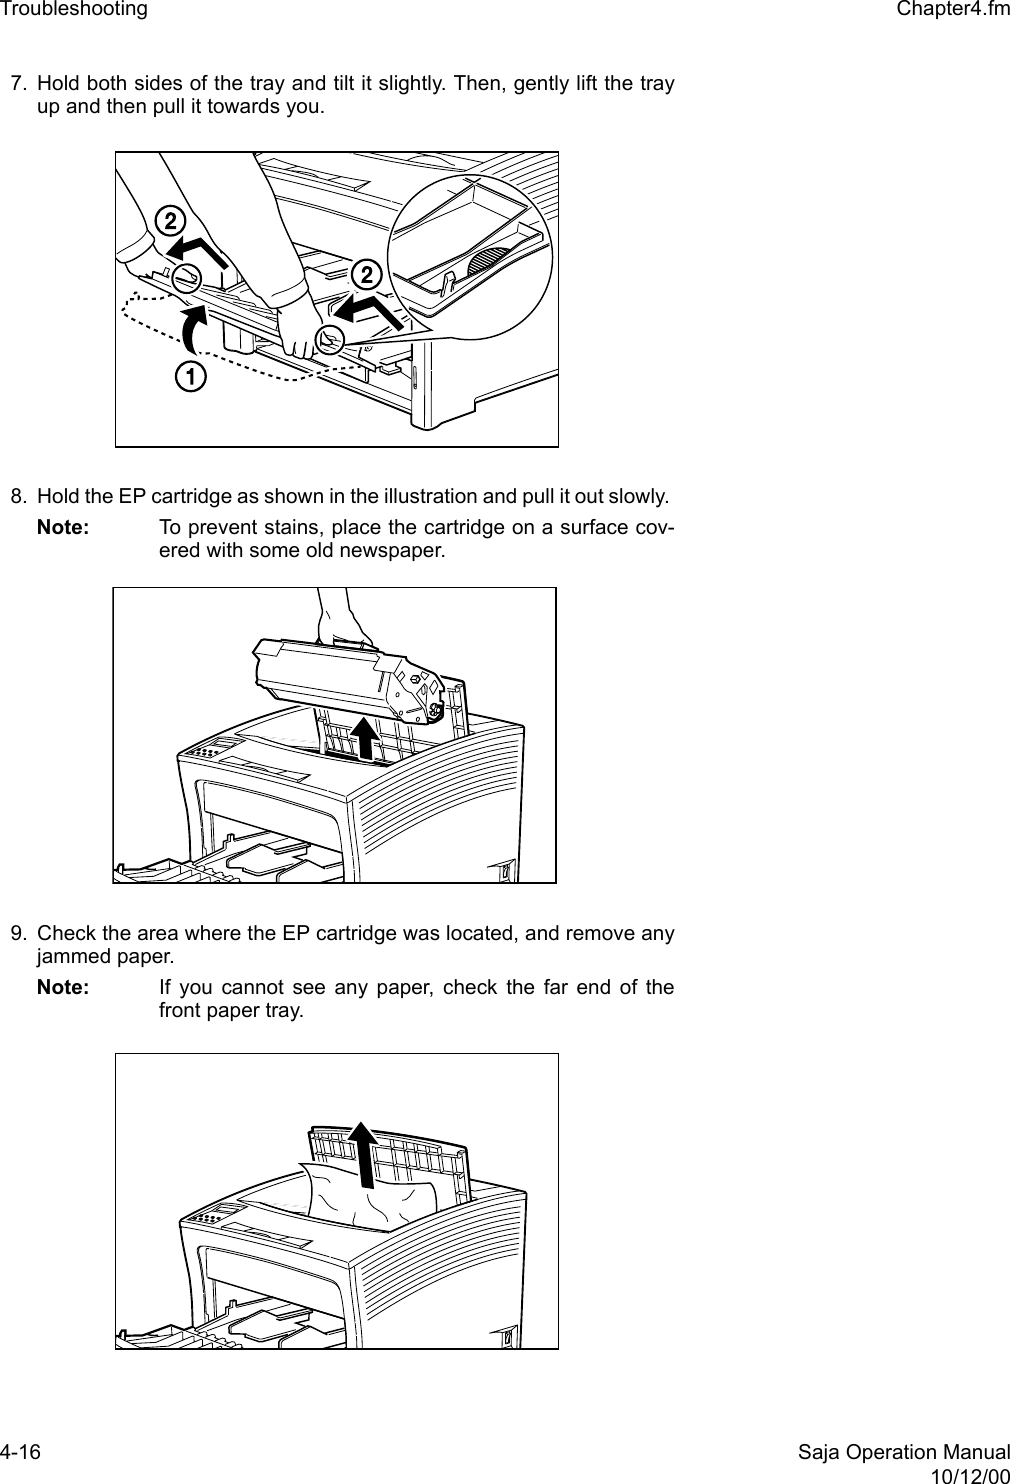 4-16 Saja Operation Manual10/12/00Troubleshooting  Chapter4.fm7. Hold both sides of the tray and tilt it slightly. Then, gently lift the trayup and then pull it towards you.8. Hold the EP cartridge as shown in the illustration and pull it out slowly. Note: To prevent stains, place the cartridge on a surface cov-ered with some old newspaper. 9. Check the area where the EP cartridge was located, and remove anyjammed paper. Note: If you cannot see any paper, check the far end of thefront paper tray. 